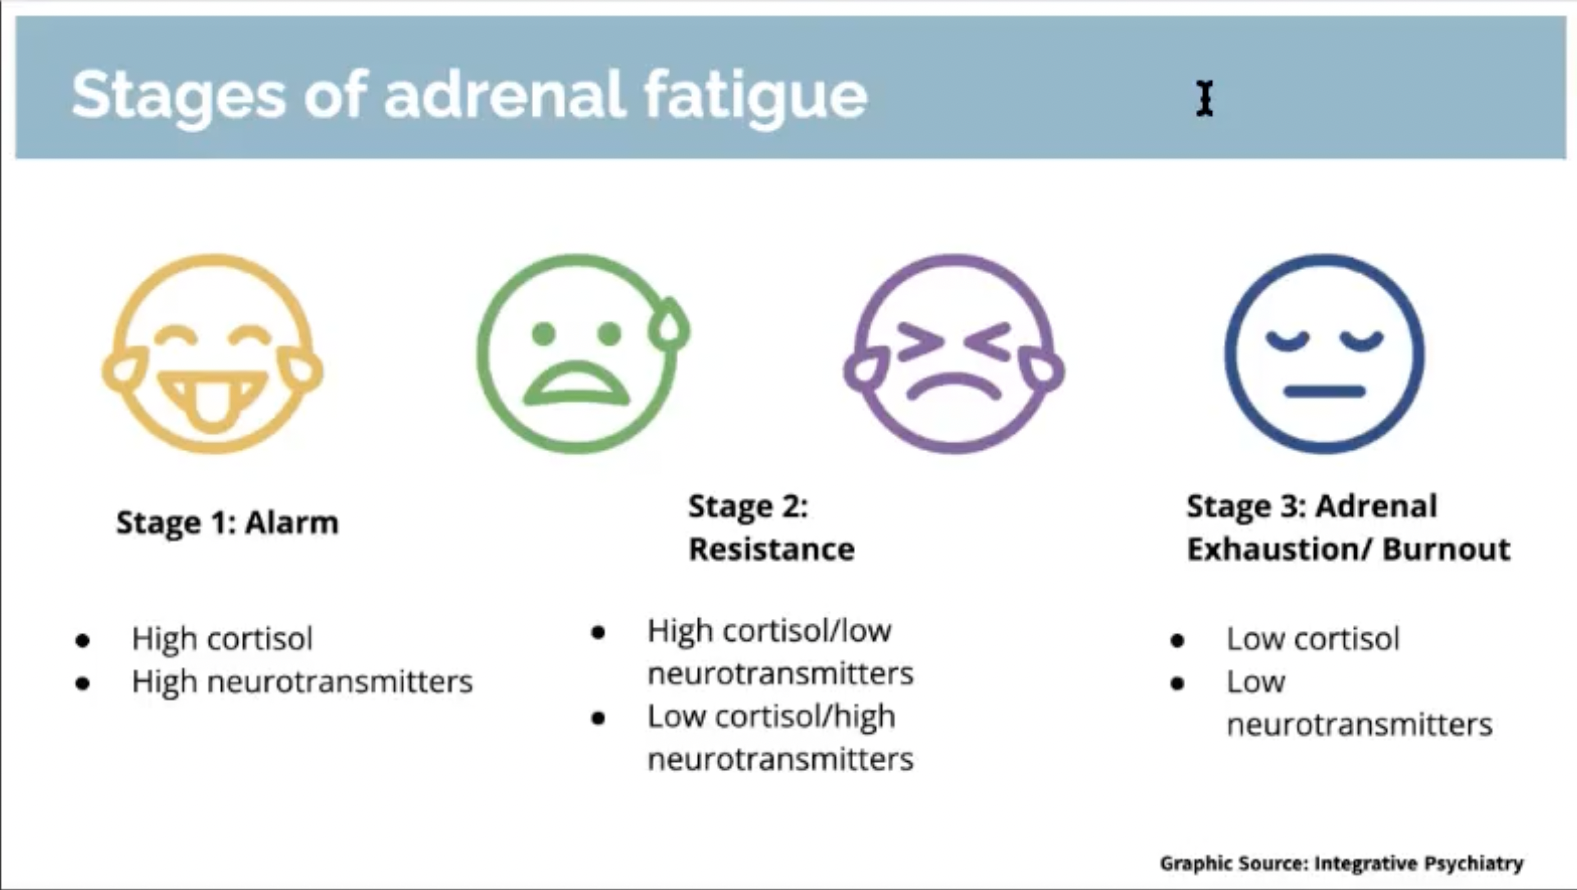 Stages of Adrenal Fatigue